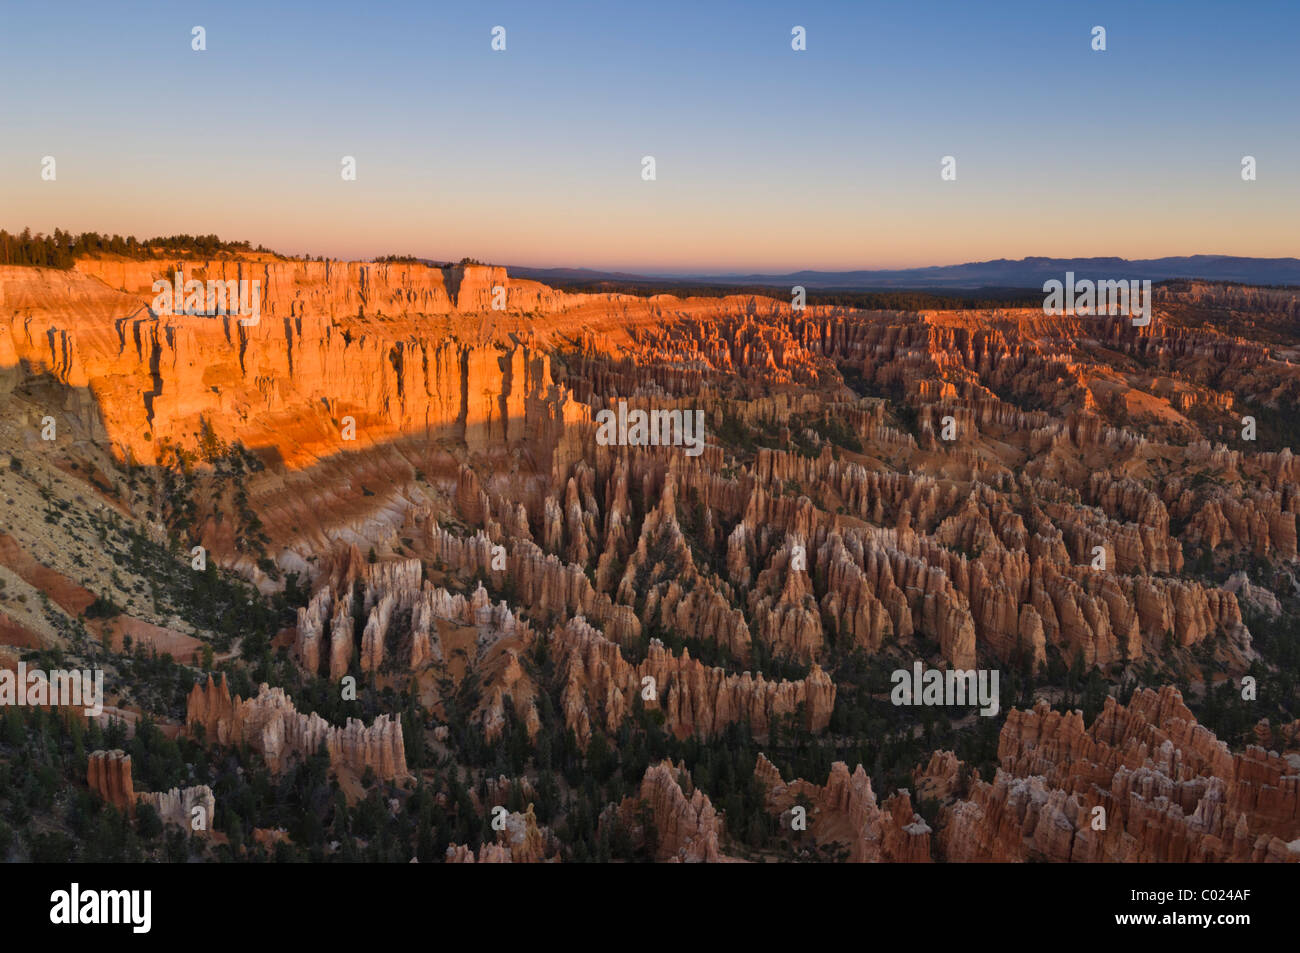 Hoodoos of the Claron formation, Bryce Ampitheater, Bryce Canyon National Park, Utah, USA Stock Photo